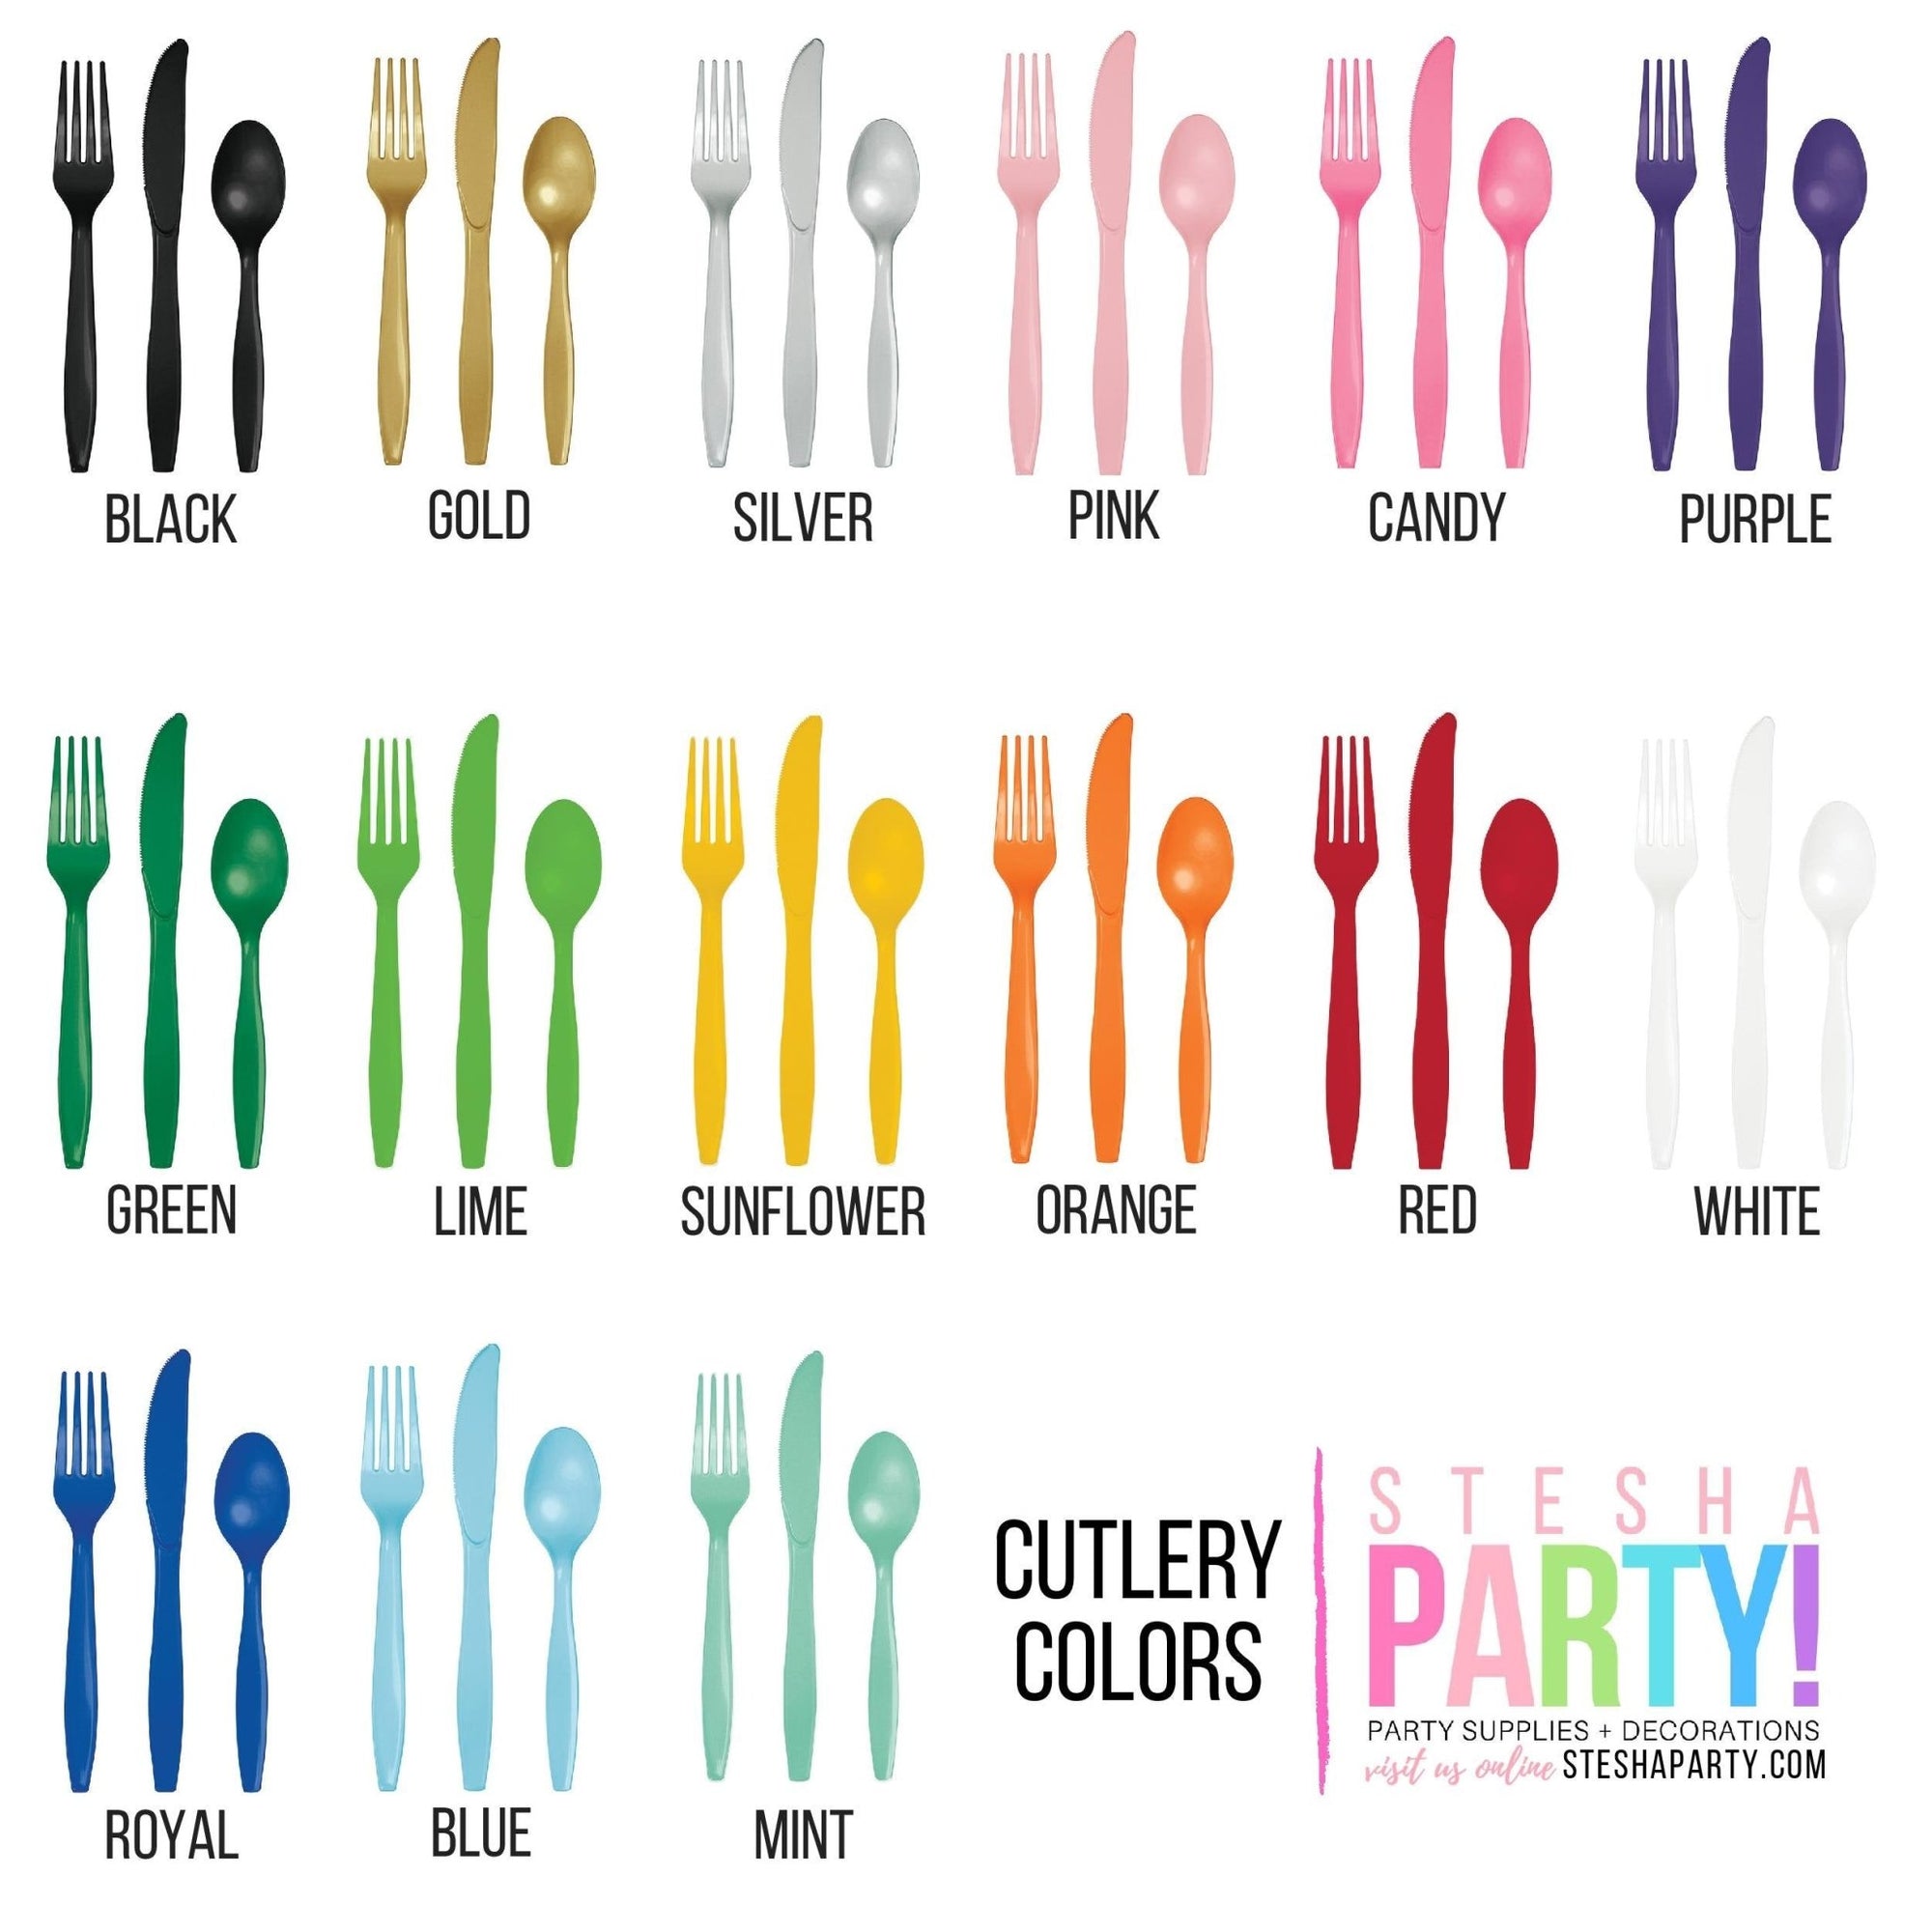 24-Set Red Cutlery - Stesha Party